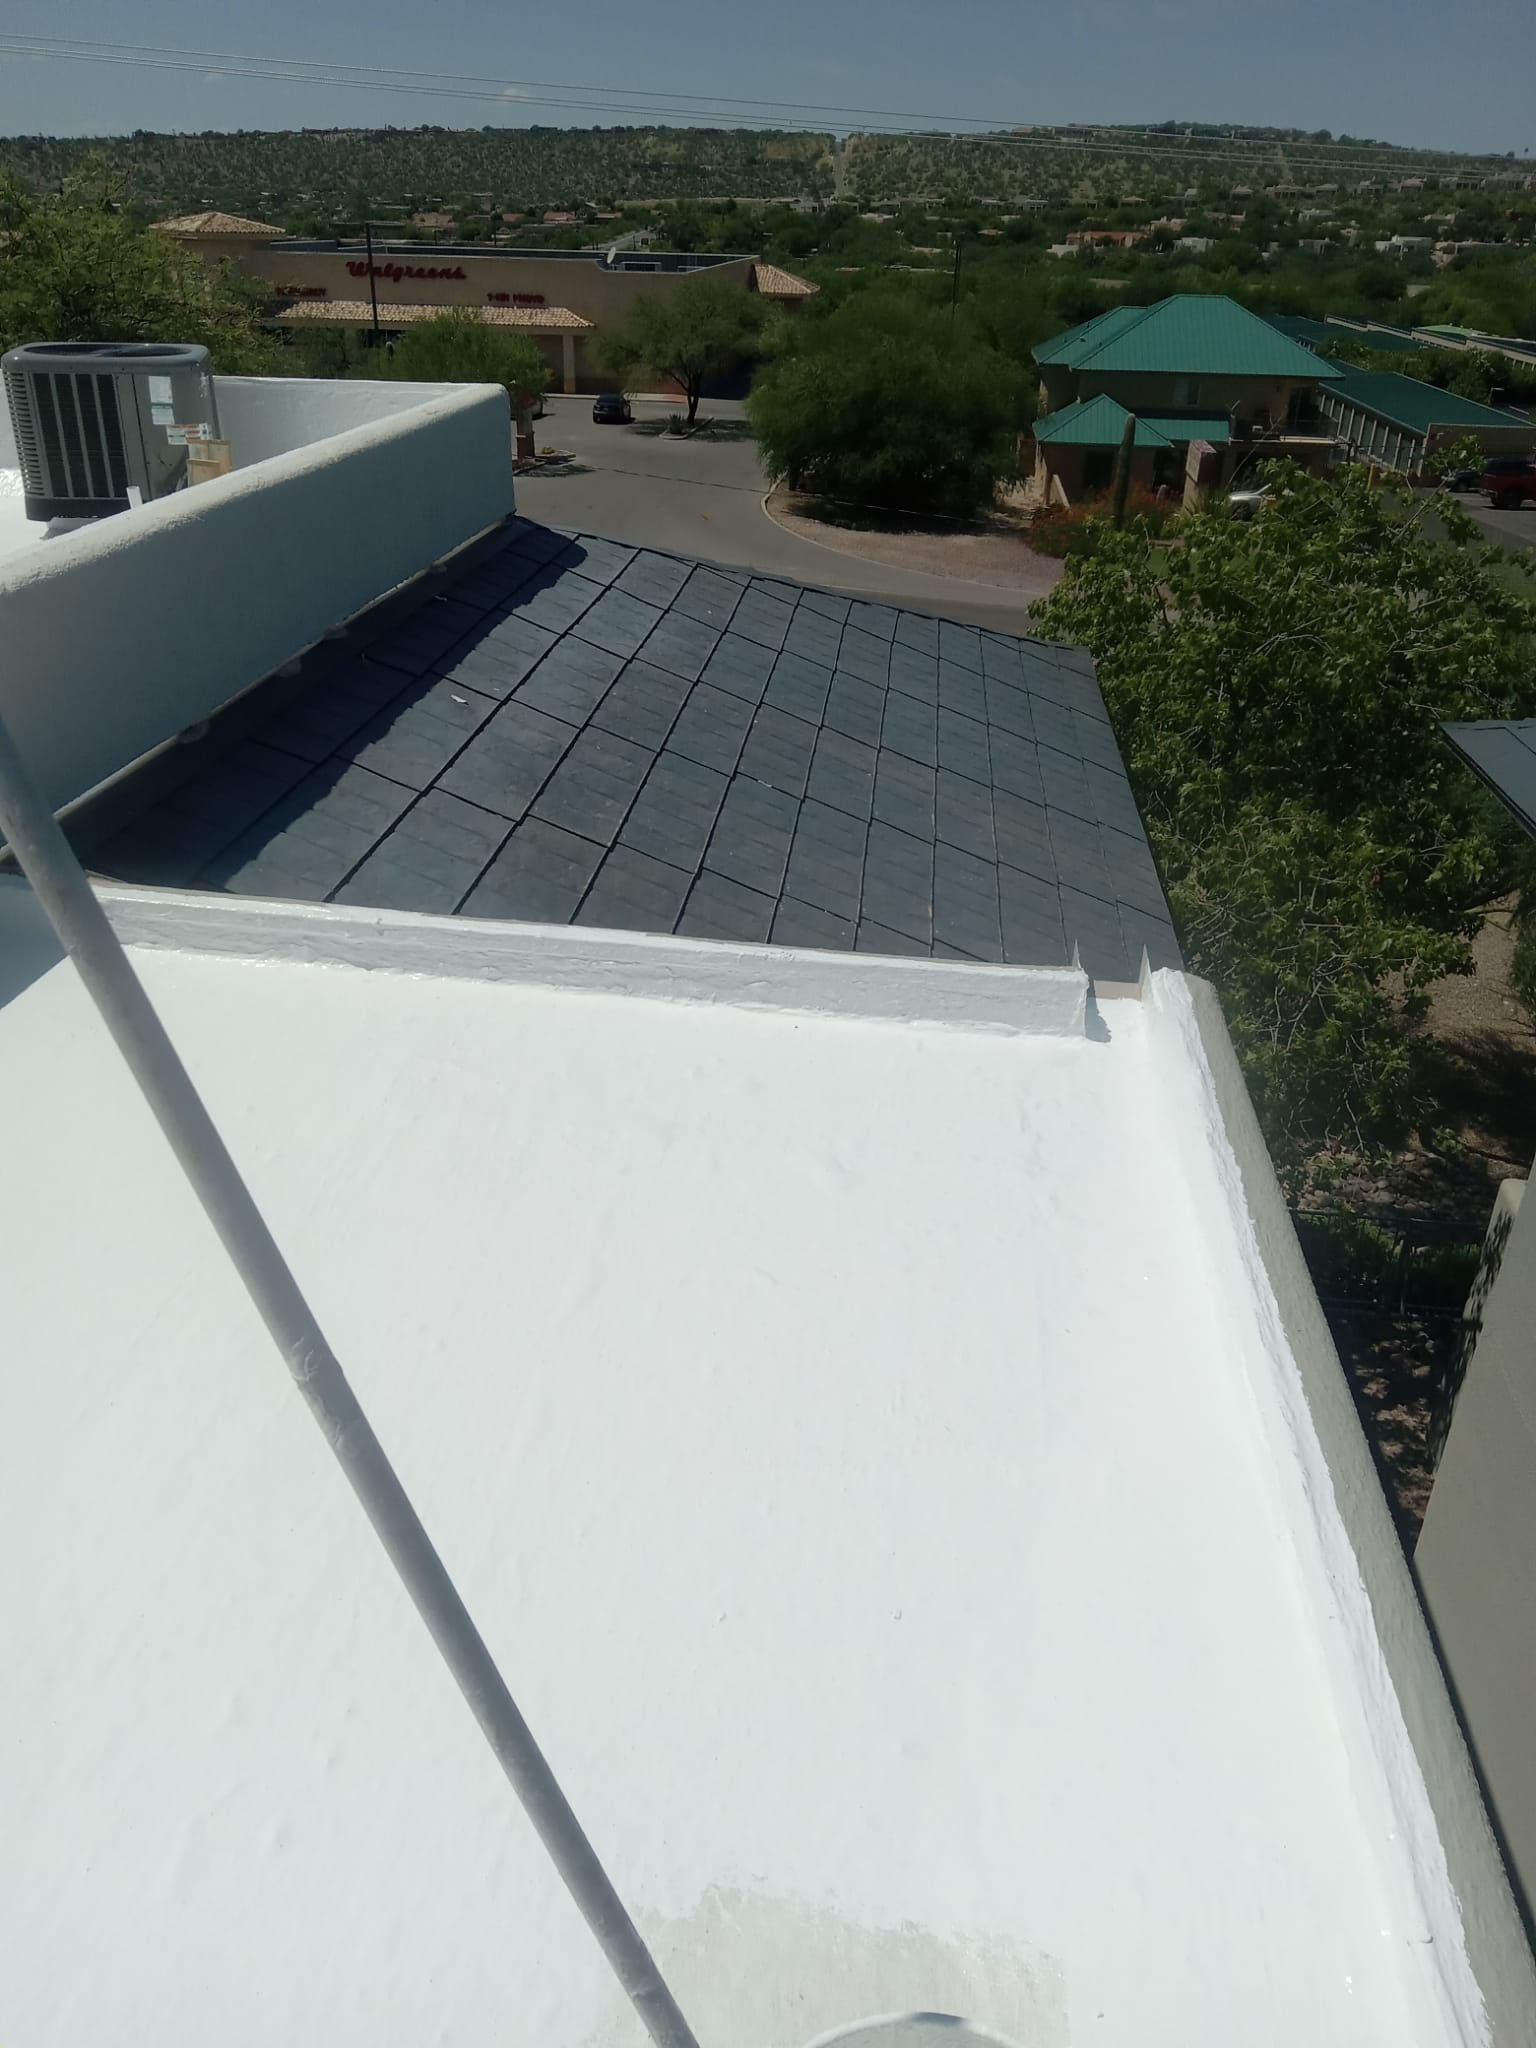 Elevated view of a residential area in Desert Mountain, featuring a newly installed spray foam and white coating on a flat roof.